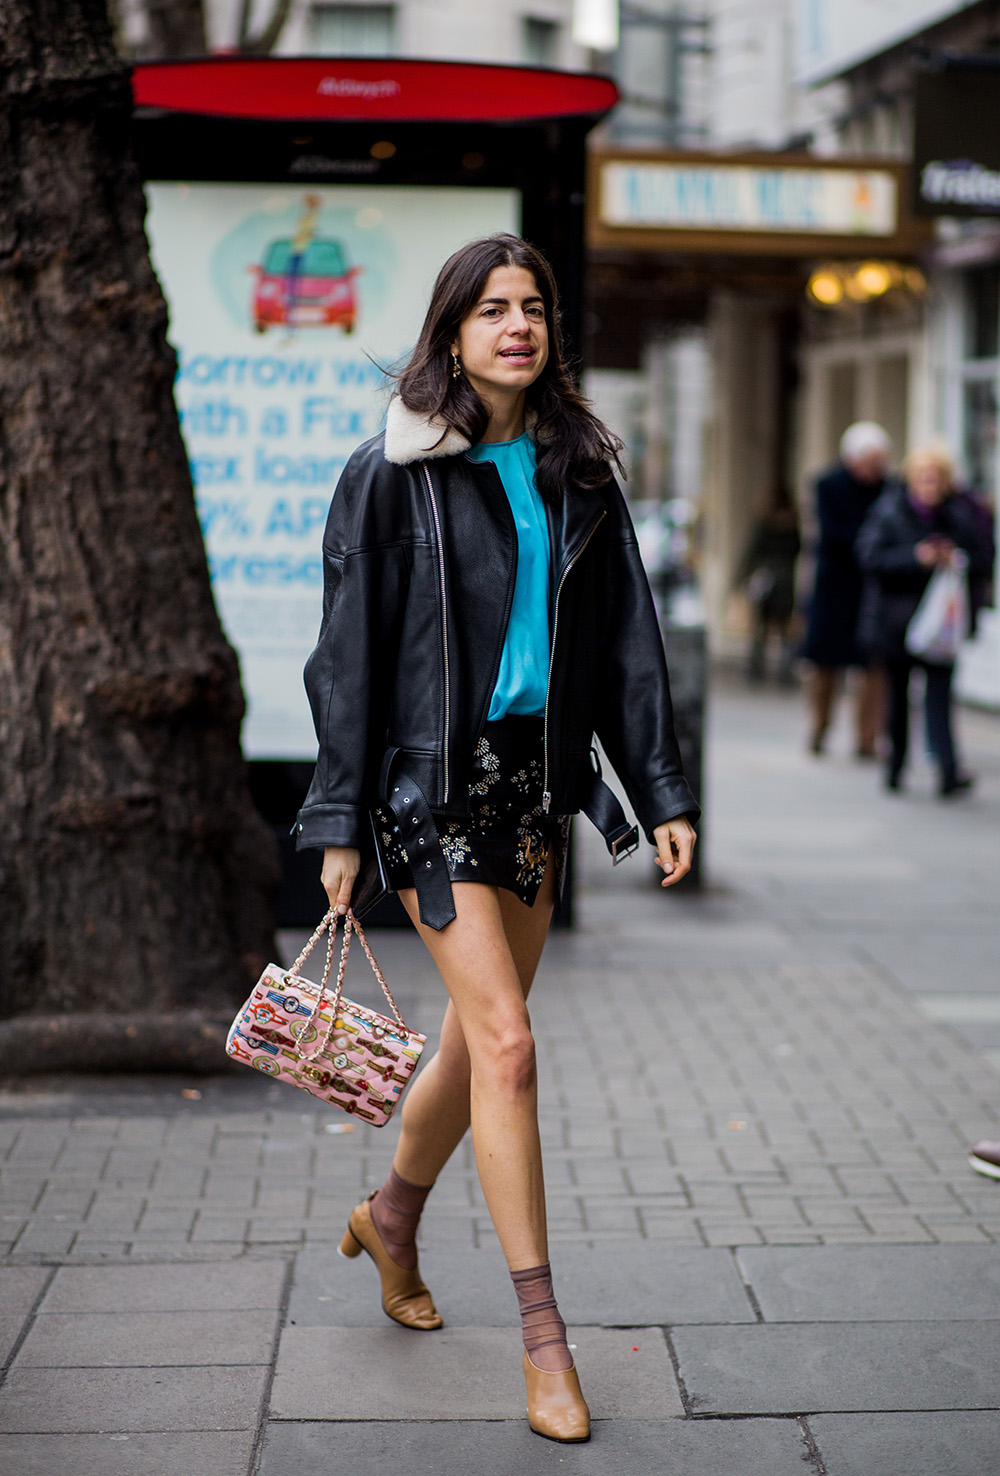 LONDON, ENGLAND - FEBRUARY 19: Leandra Medine wearing a leather jacket, mini skirt outside Peter Pilotto on day 3 of the London Fashion Week February 2017 collections on February 19, 2017 in London, England. (Photo by Christian Vierig/Getty Images)